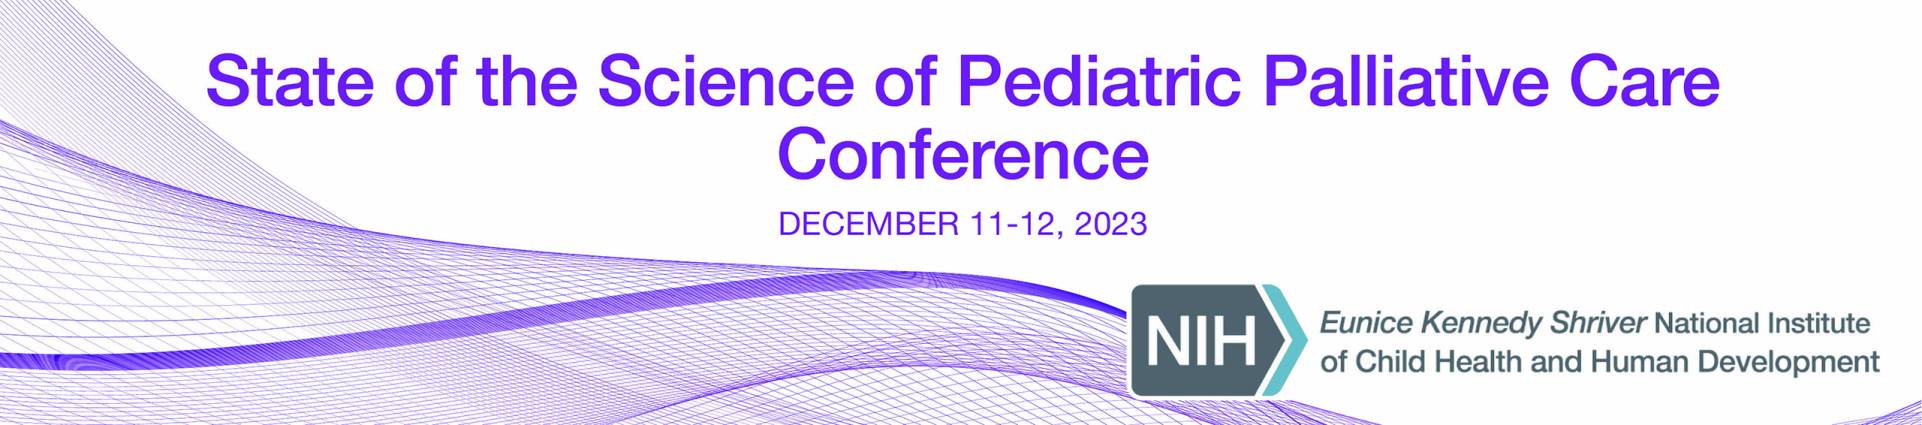 State of the Science of Pediatric Palliative Care Conference. December 11 to 12, 2023